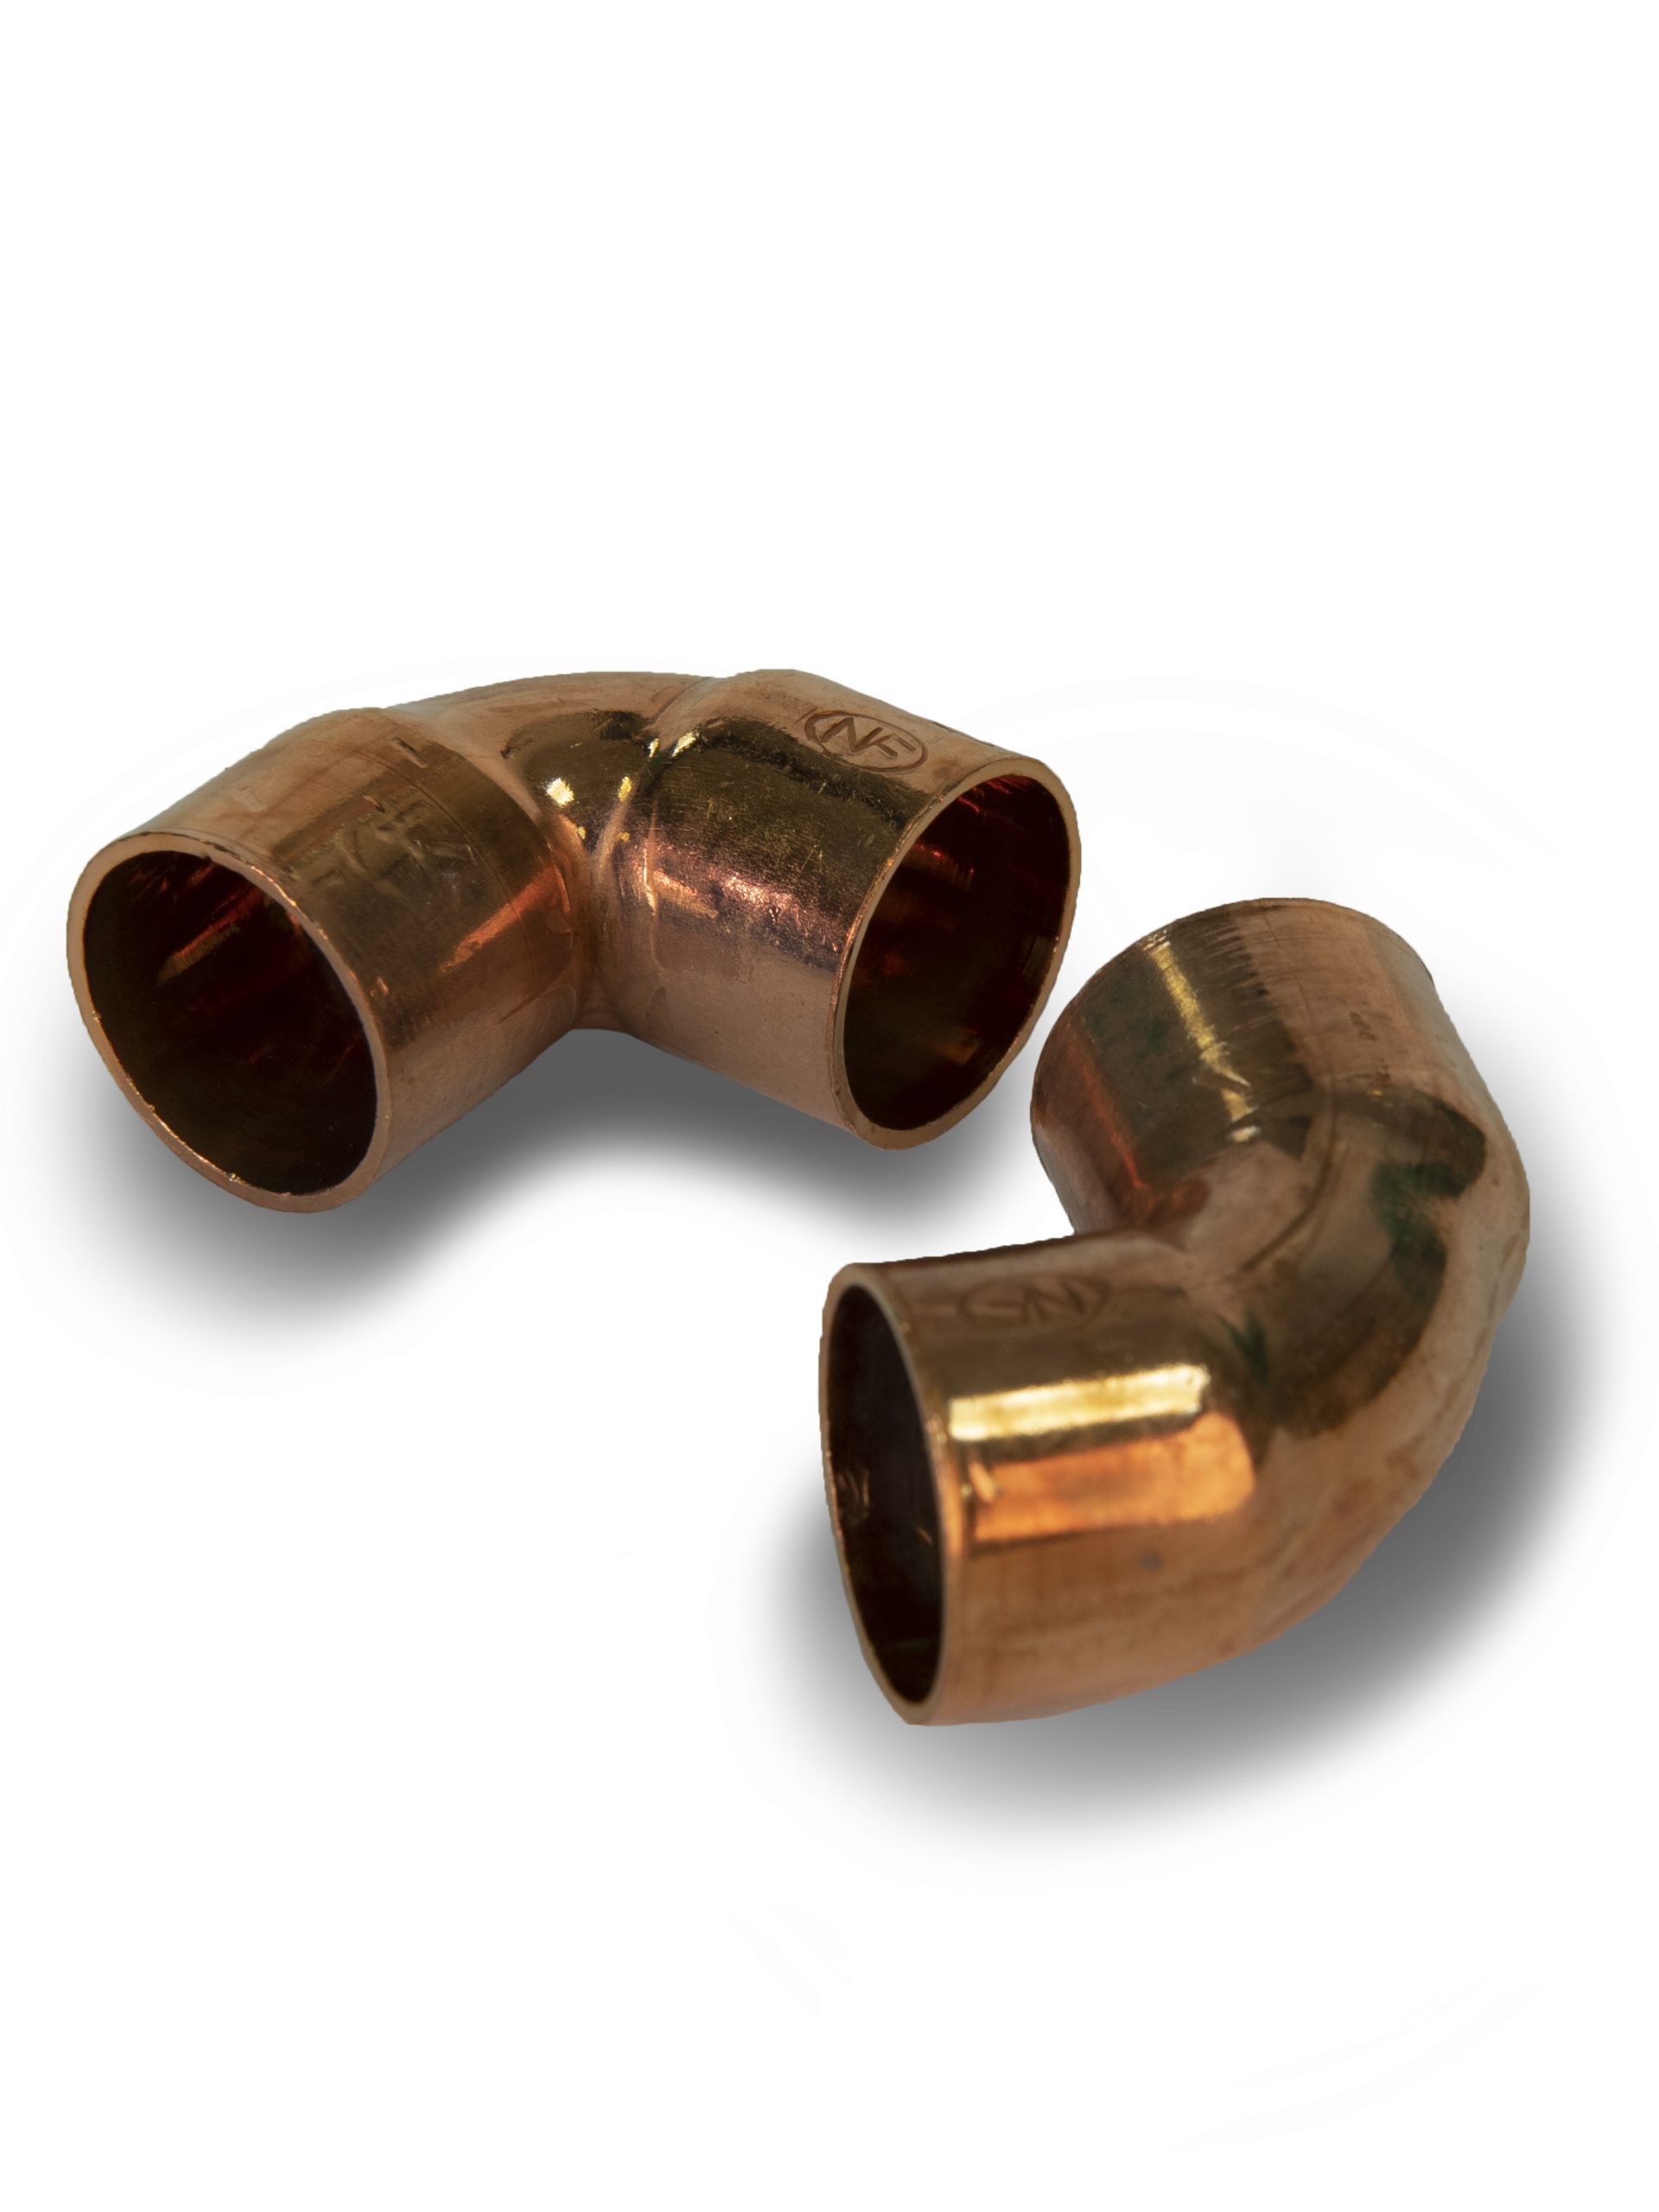 COPPER ELBOW 90 , 18MM, COMAP-CLESSE from Gas Equipment Company Llc Abu Dhabi, UNITED ARAB EMIRATES